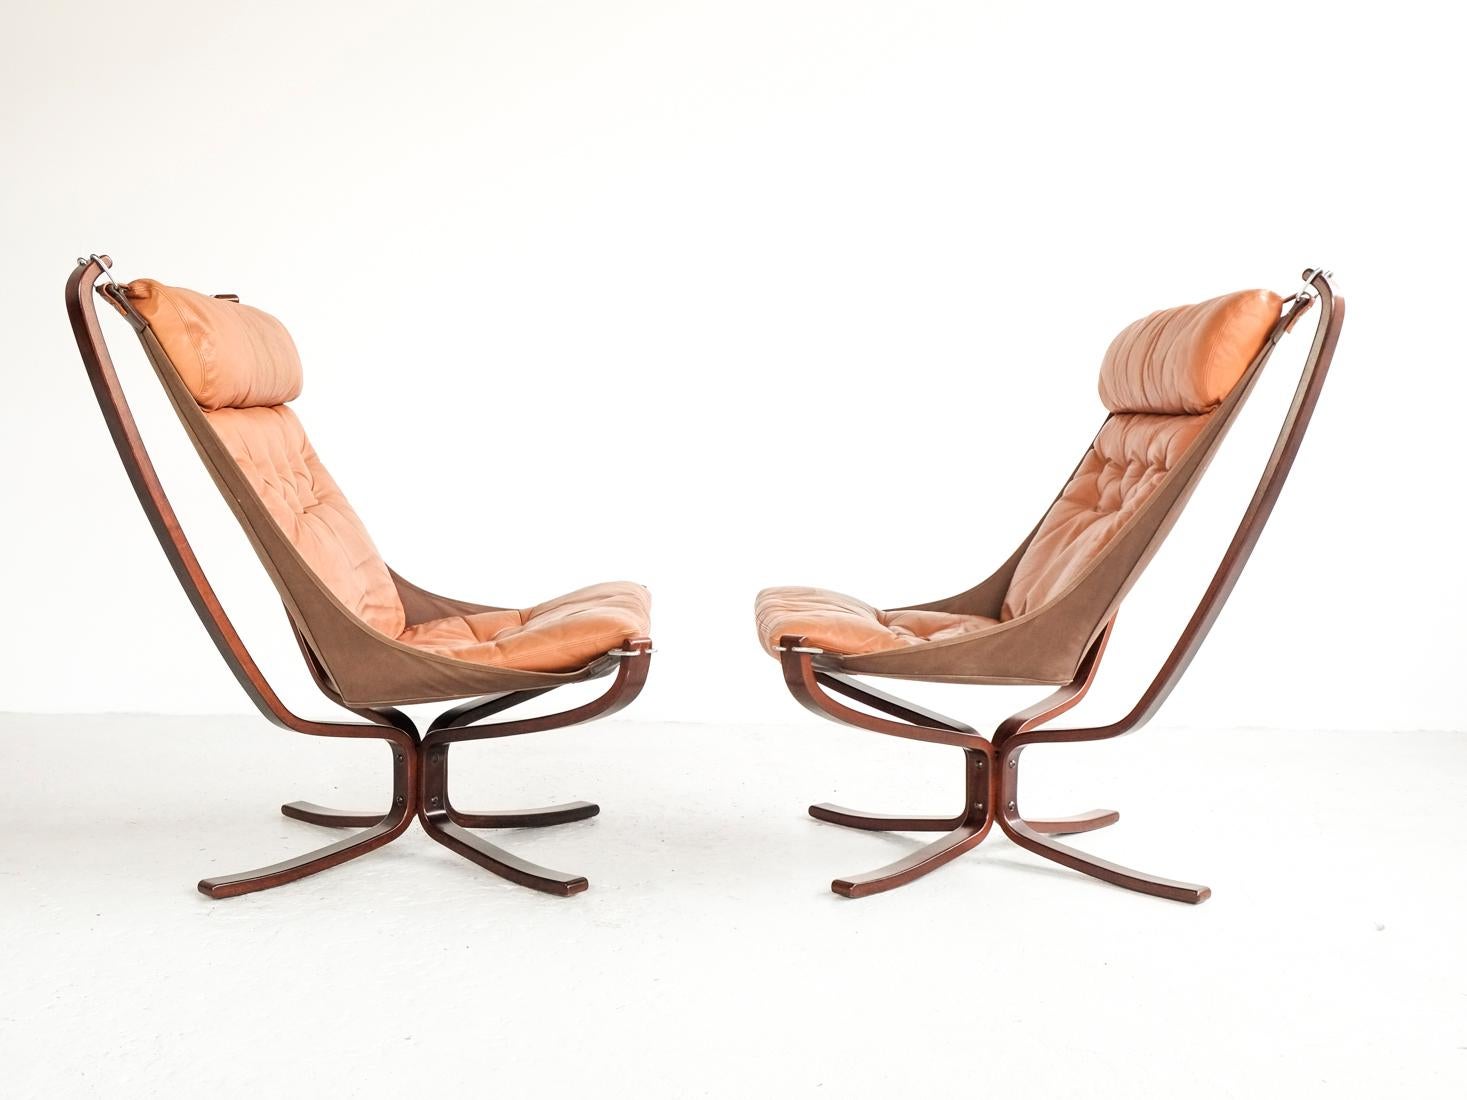 Norwegian Midcentury Pair of High-Back Falcon Chairs by Sigurd Ressell for Vatne Møbler